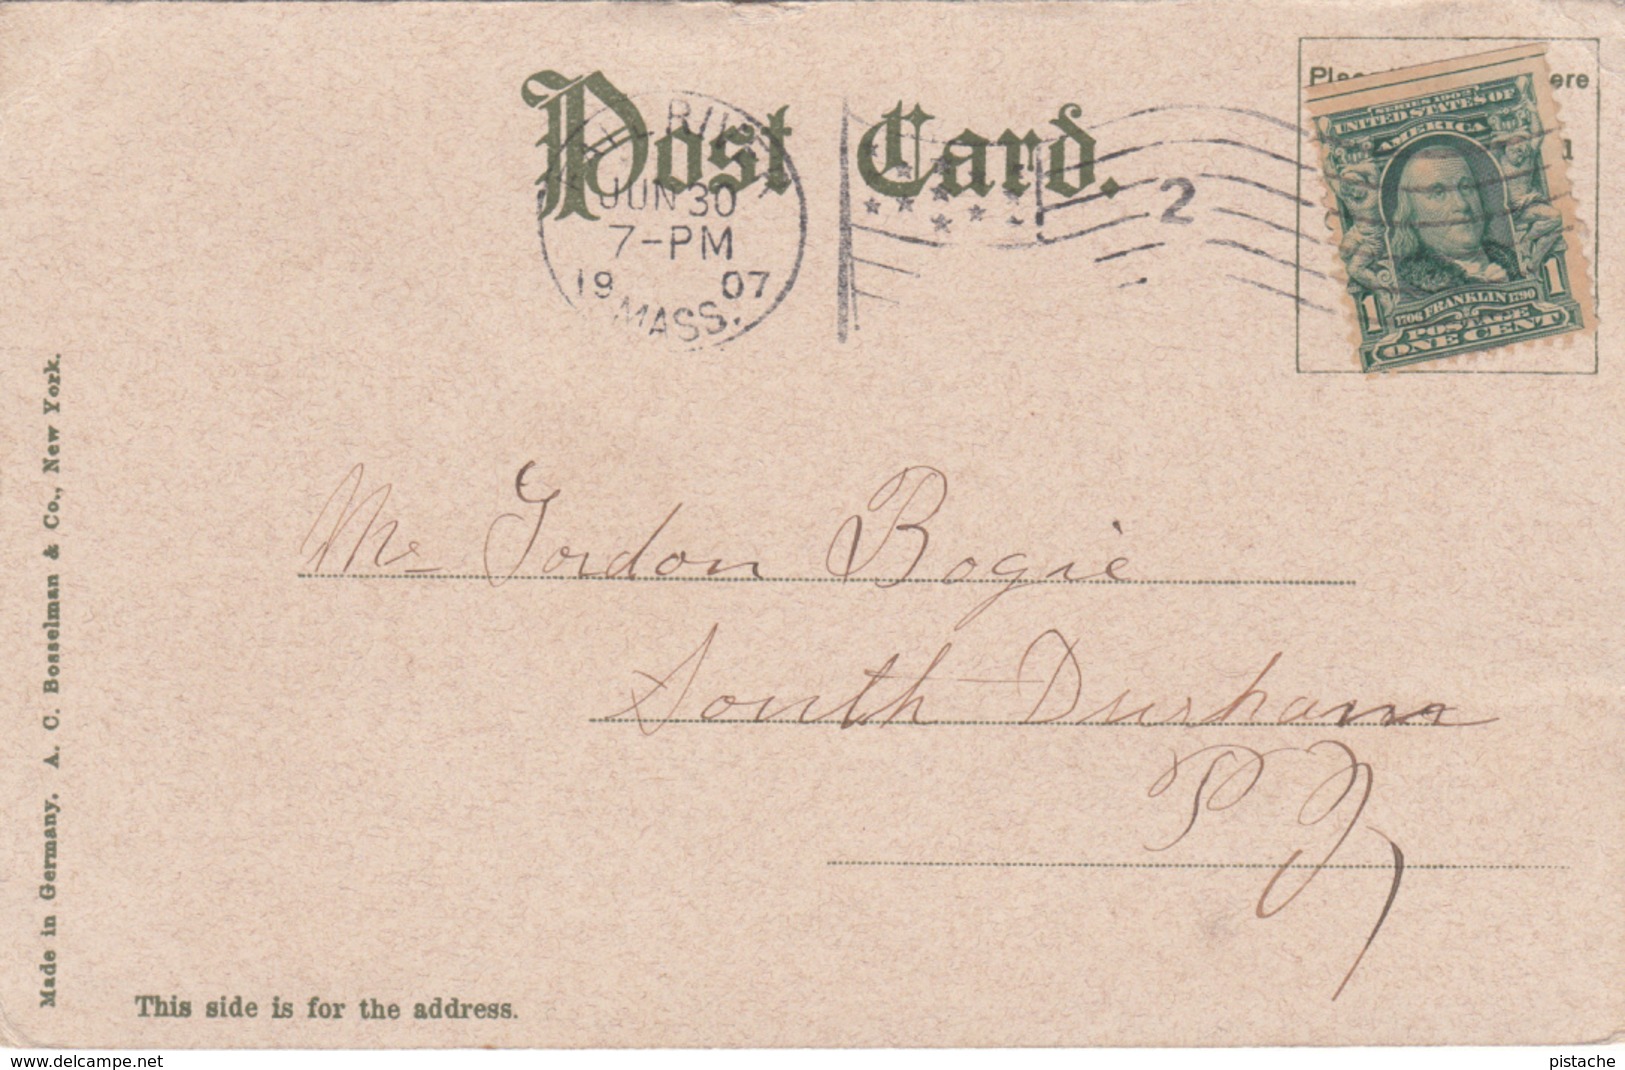 Antique 1907 Postcard - Fall River Massachusetts MA - State Armory - Undivided Back - Written - Stamp Postmark - 2 Scans - Fall River